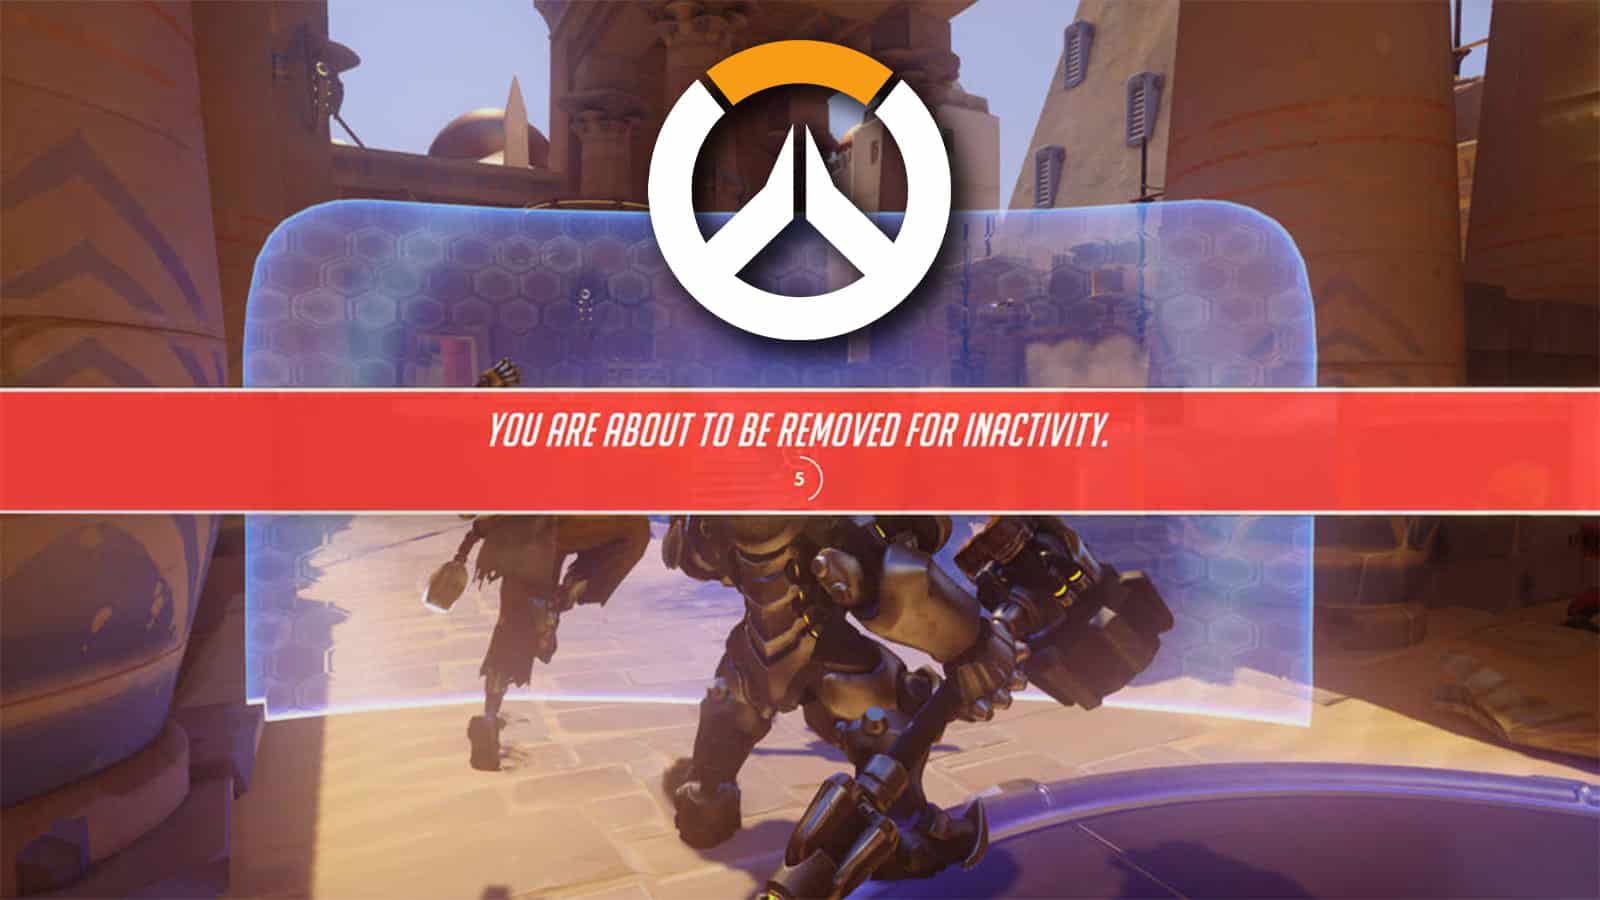 Blizzard Overwatch inactivity bug kicking players